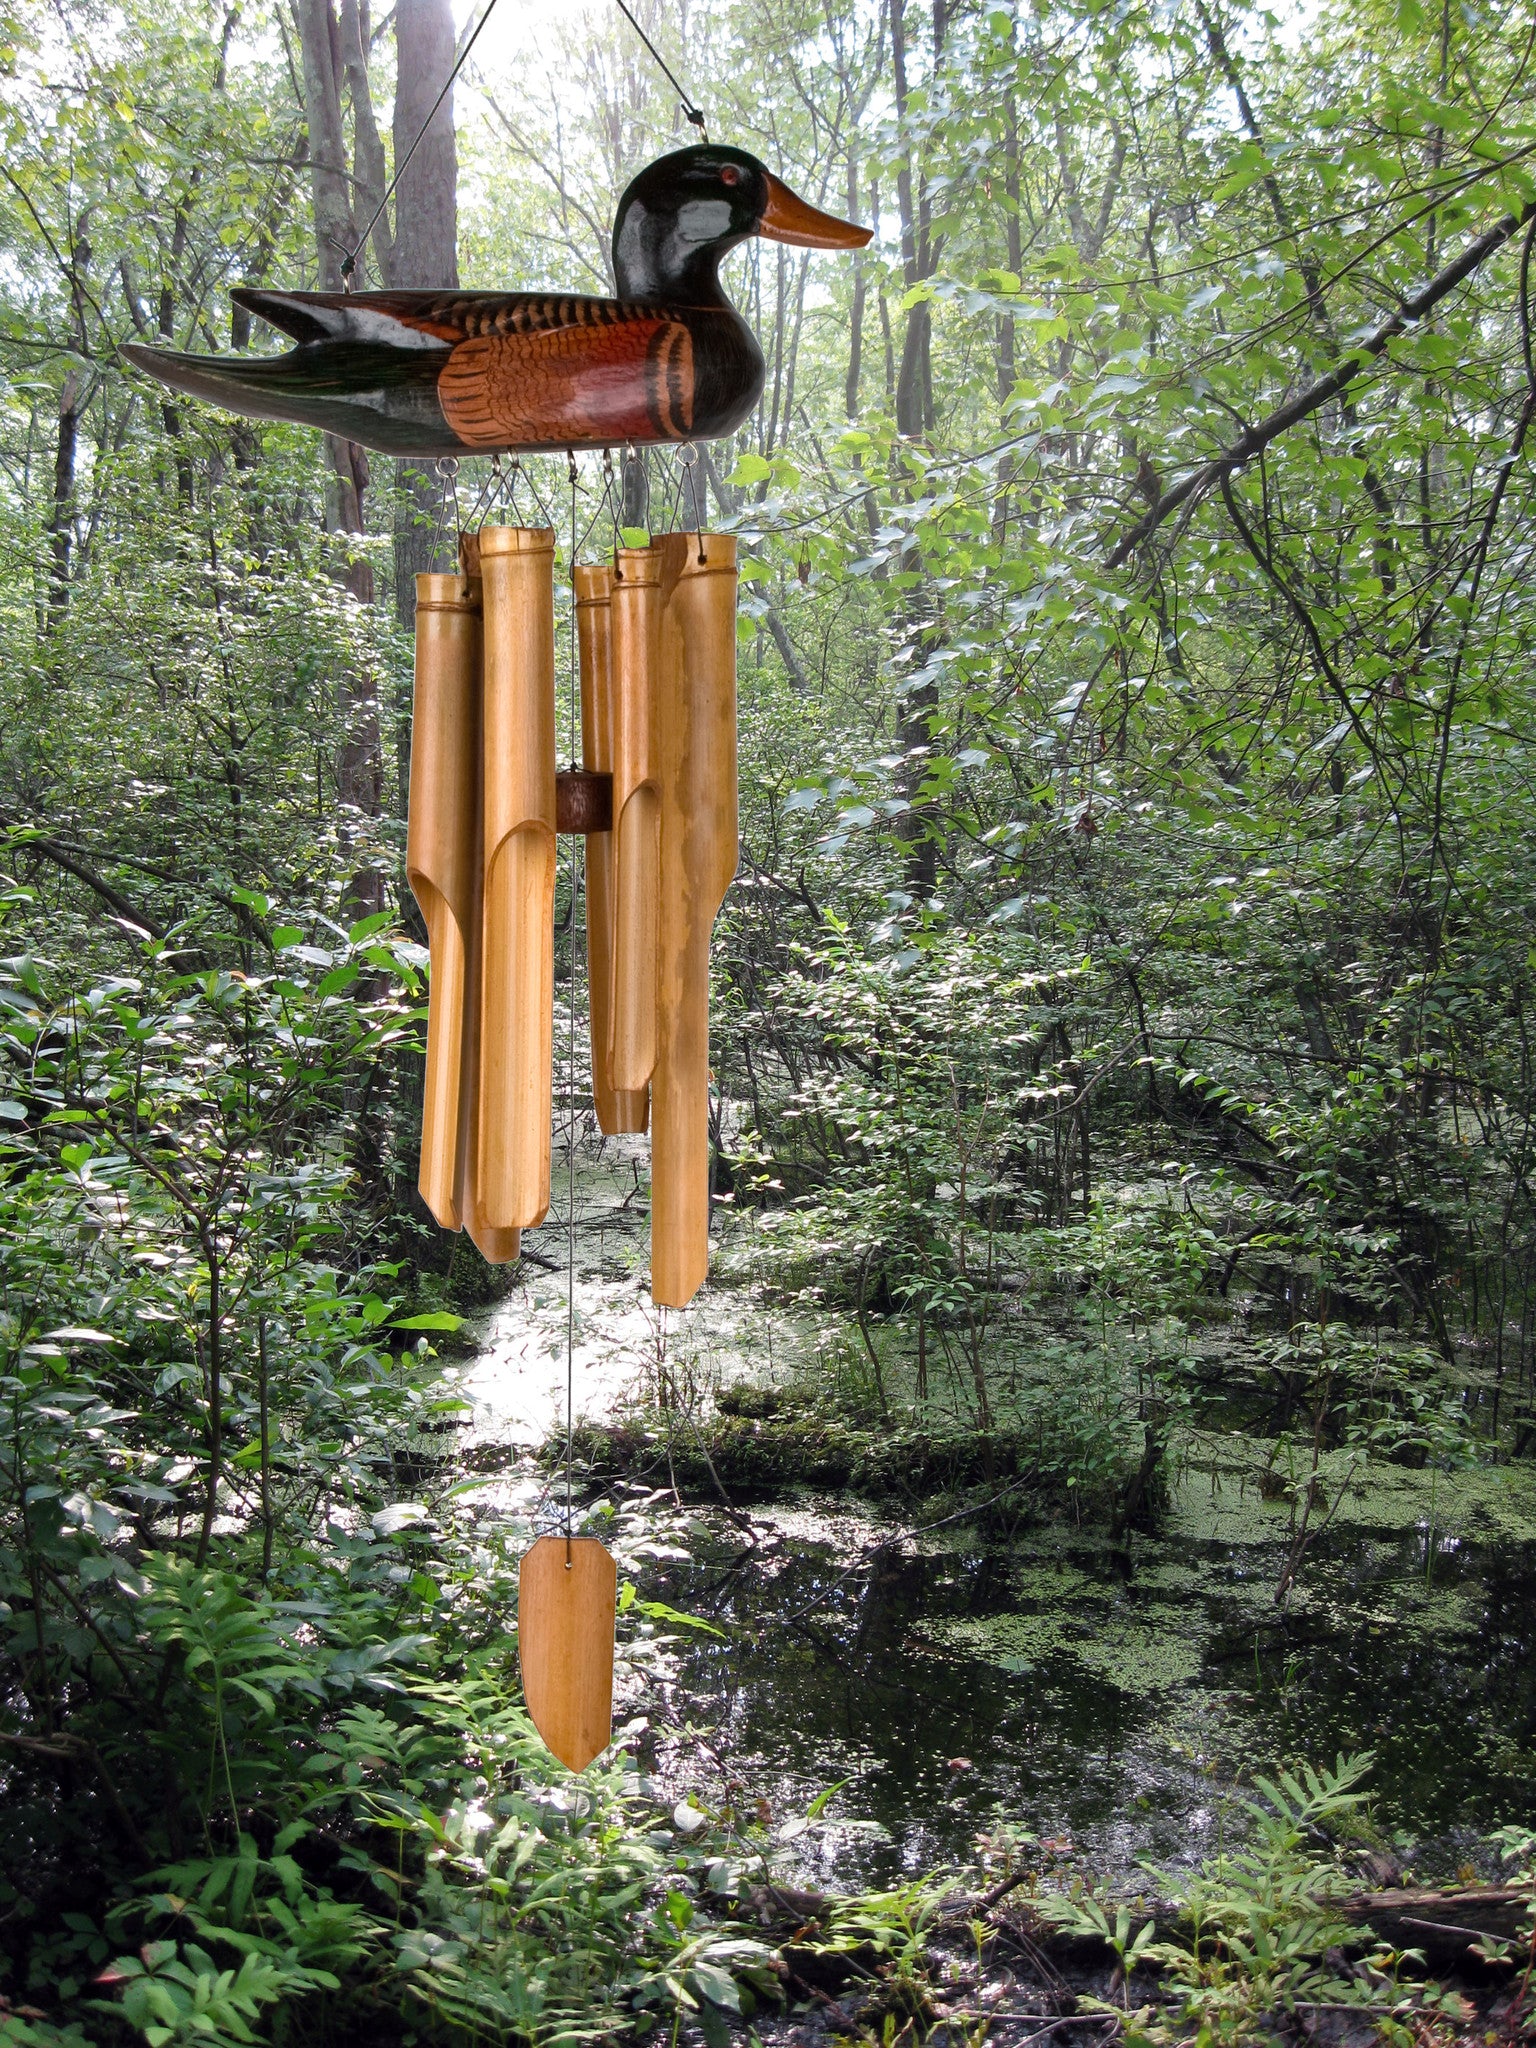 Woodstock Animal Bamboo Chime - Mallard Duck CDK306 -  - Discontinued as of 07/2015